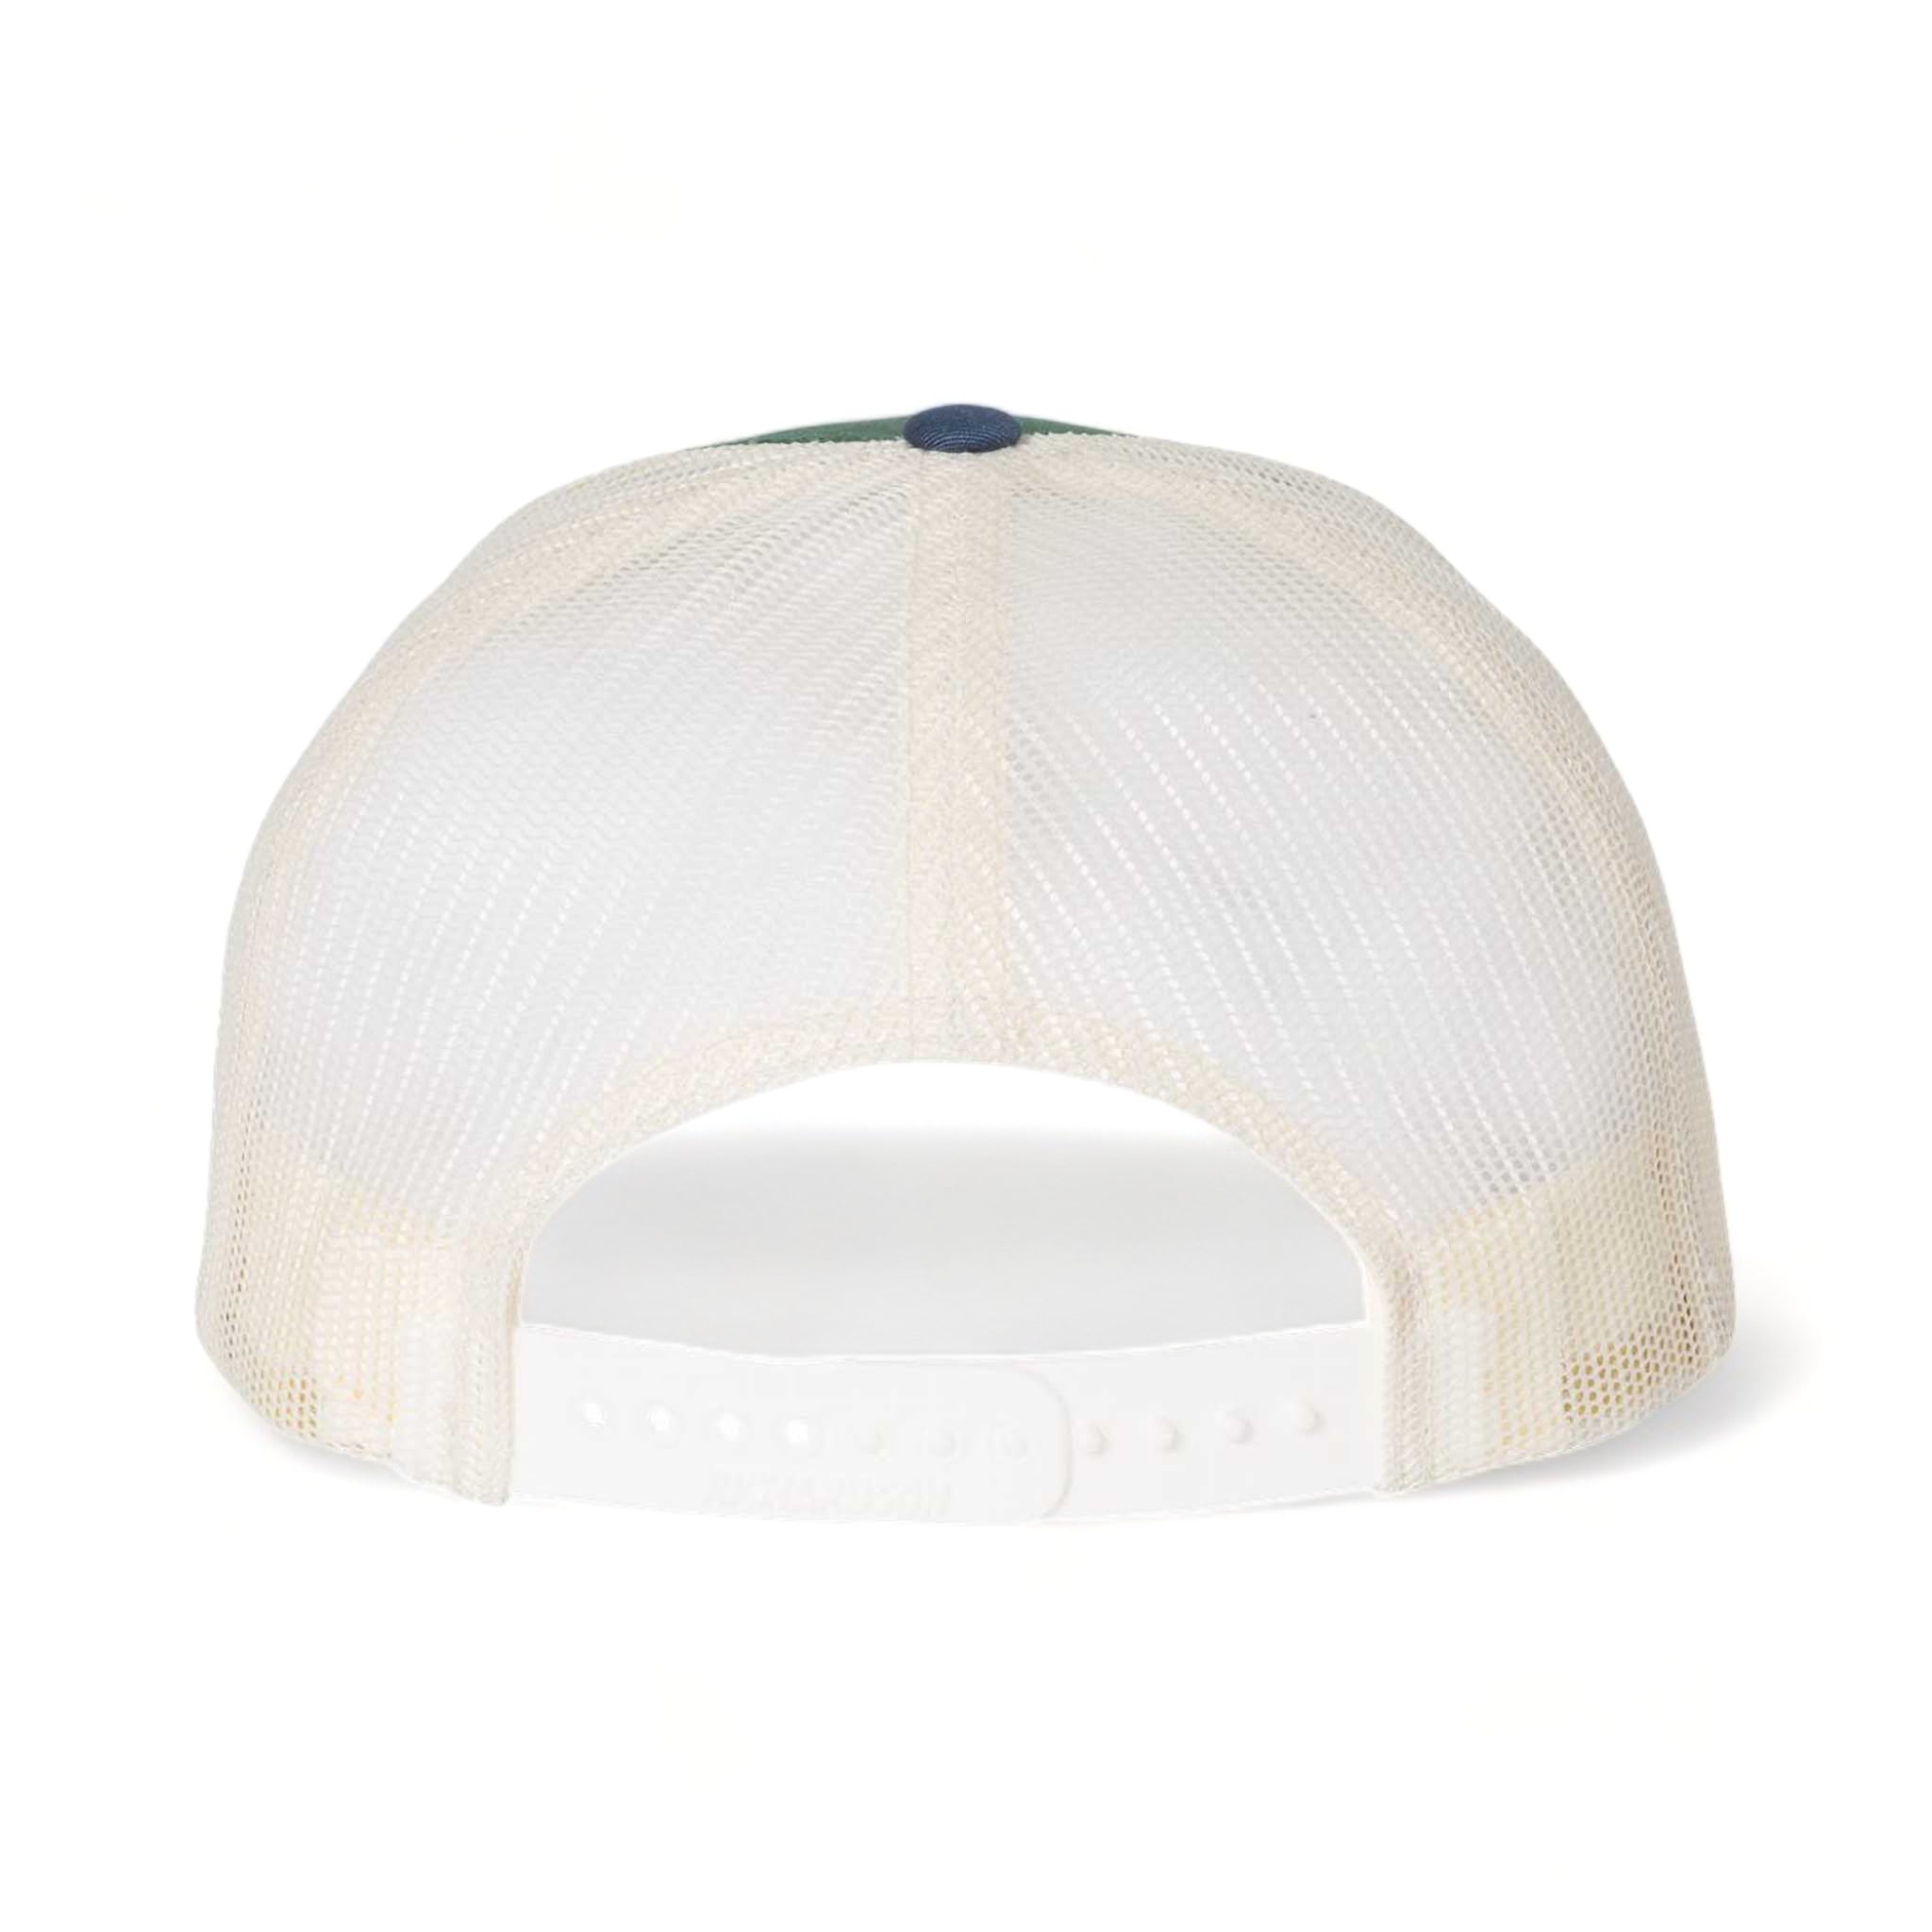 Back view of Richardson 115 custom hat in spruce, birch and light navy